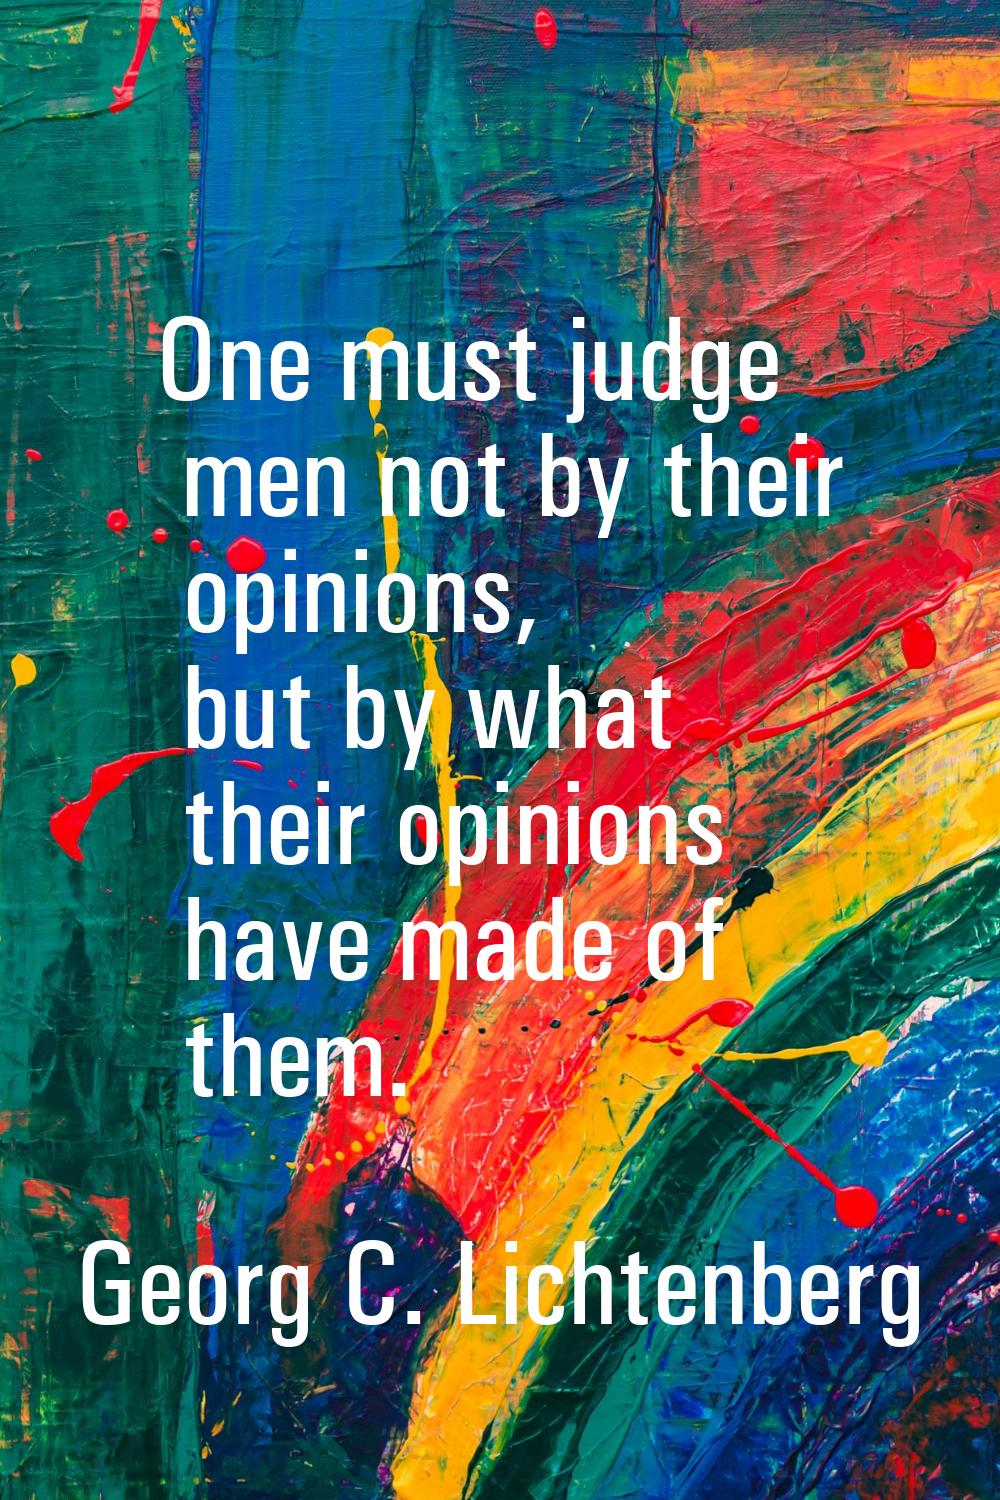 One must judge men not by their opinions, but by what their opinions have made of them.